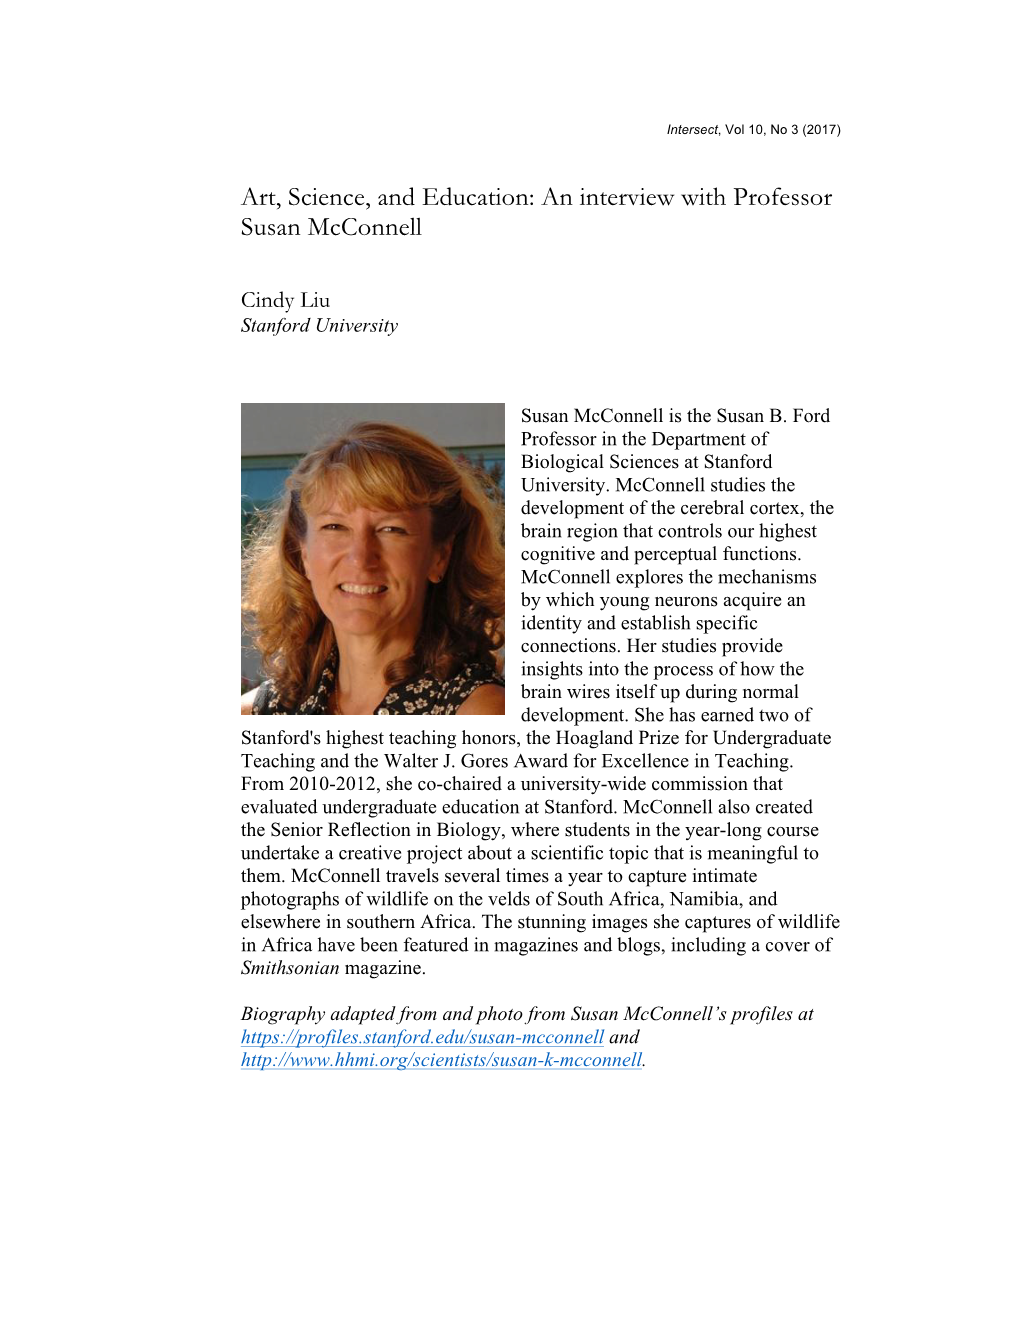 Art, Science, and Education: an Interview with Professor Susan Mcconnell